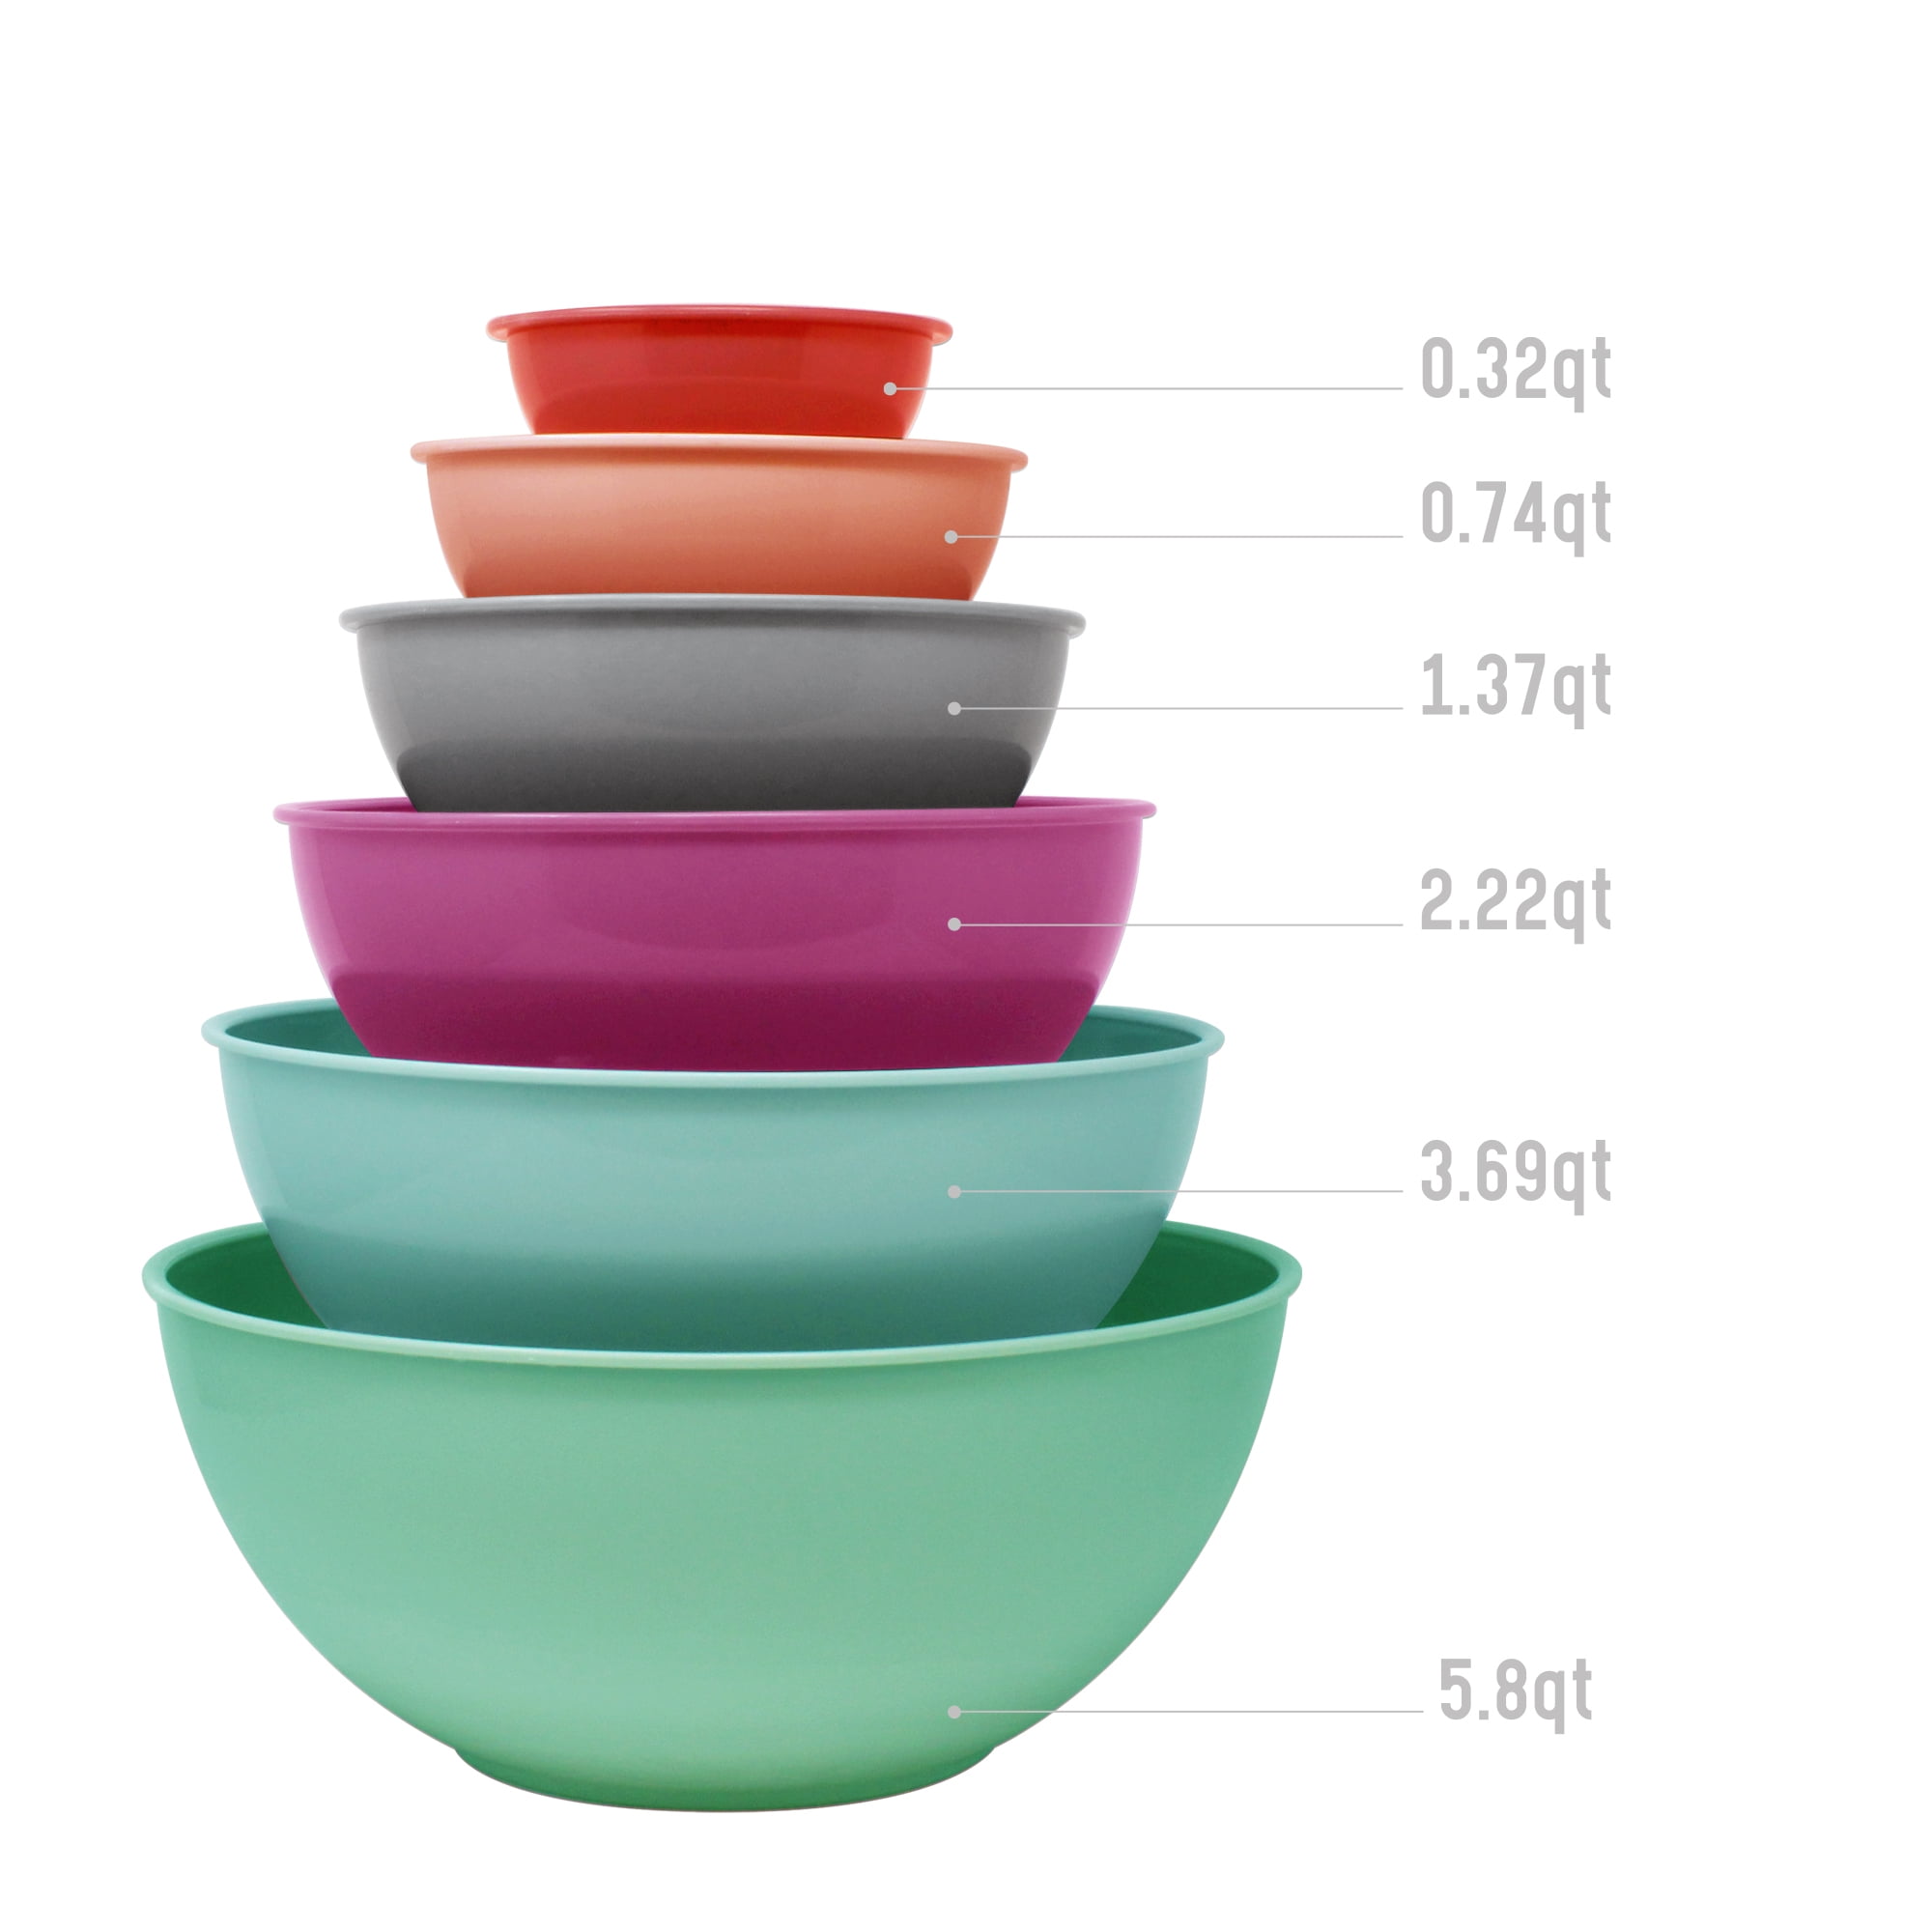 Zulay Kitchen 12 Piece Plastic Mixing Bowls with Lids Set - Colorful Mixing  Bowl Set for Kitchen - Nesting Bowls with Lids Set - Microwave and Freezer